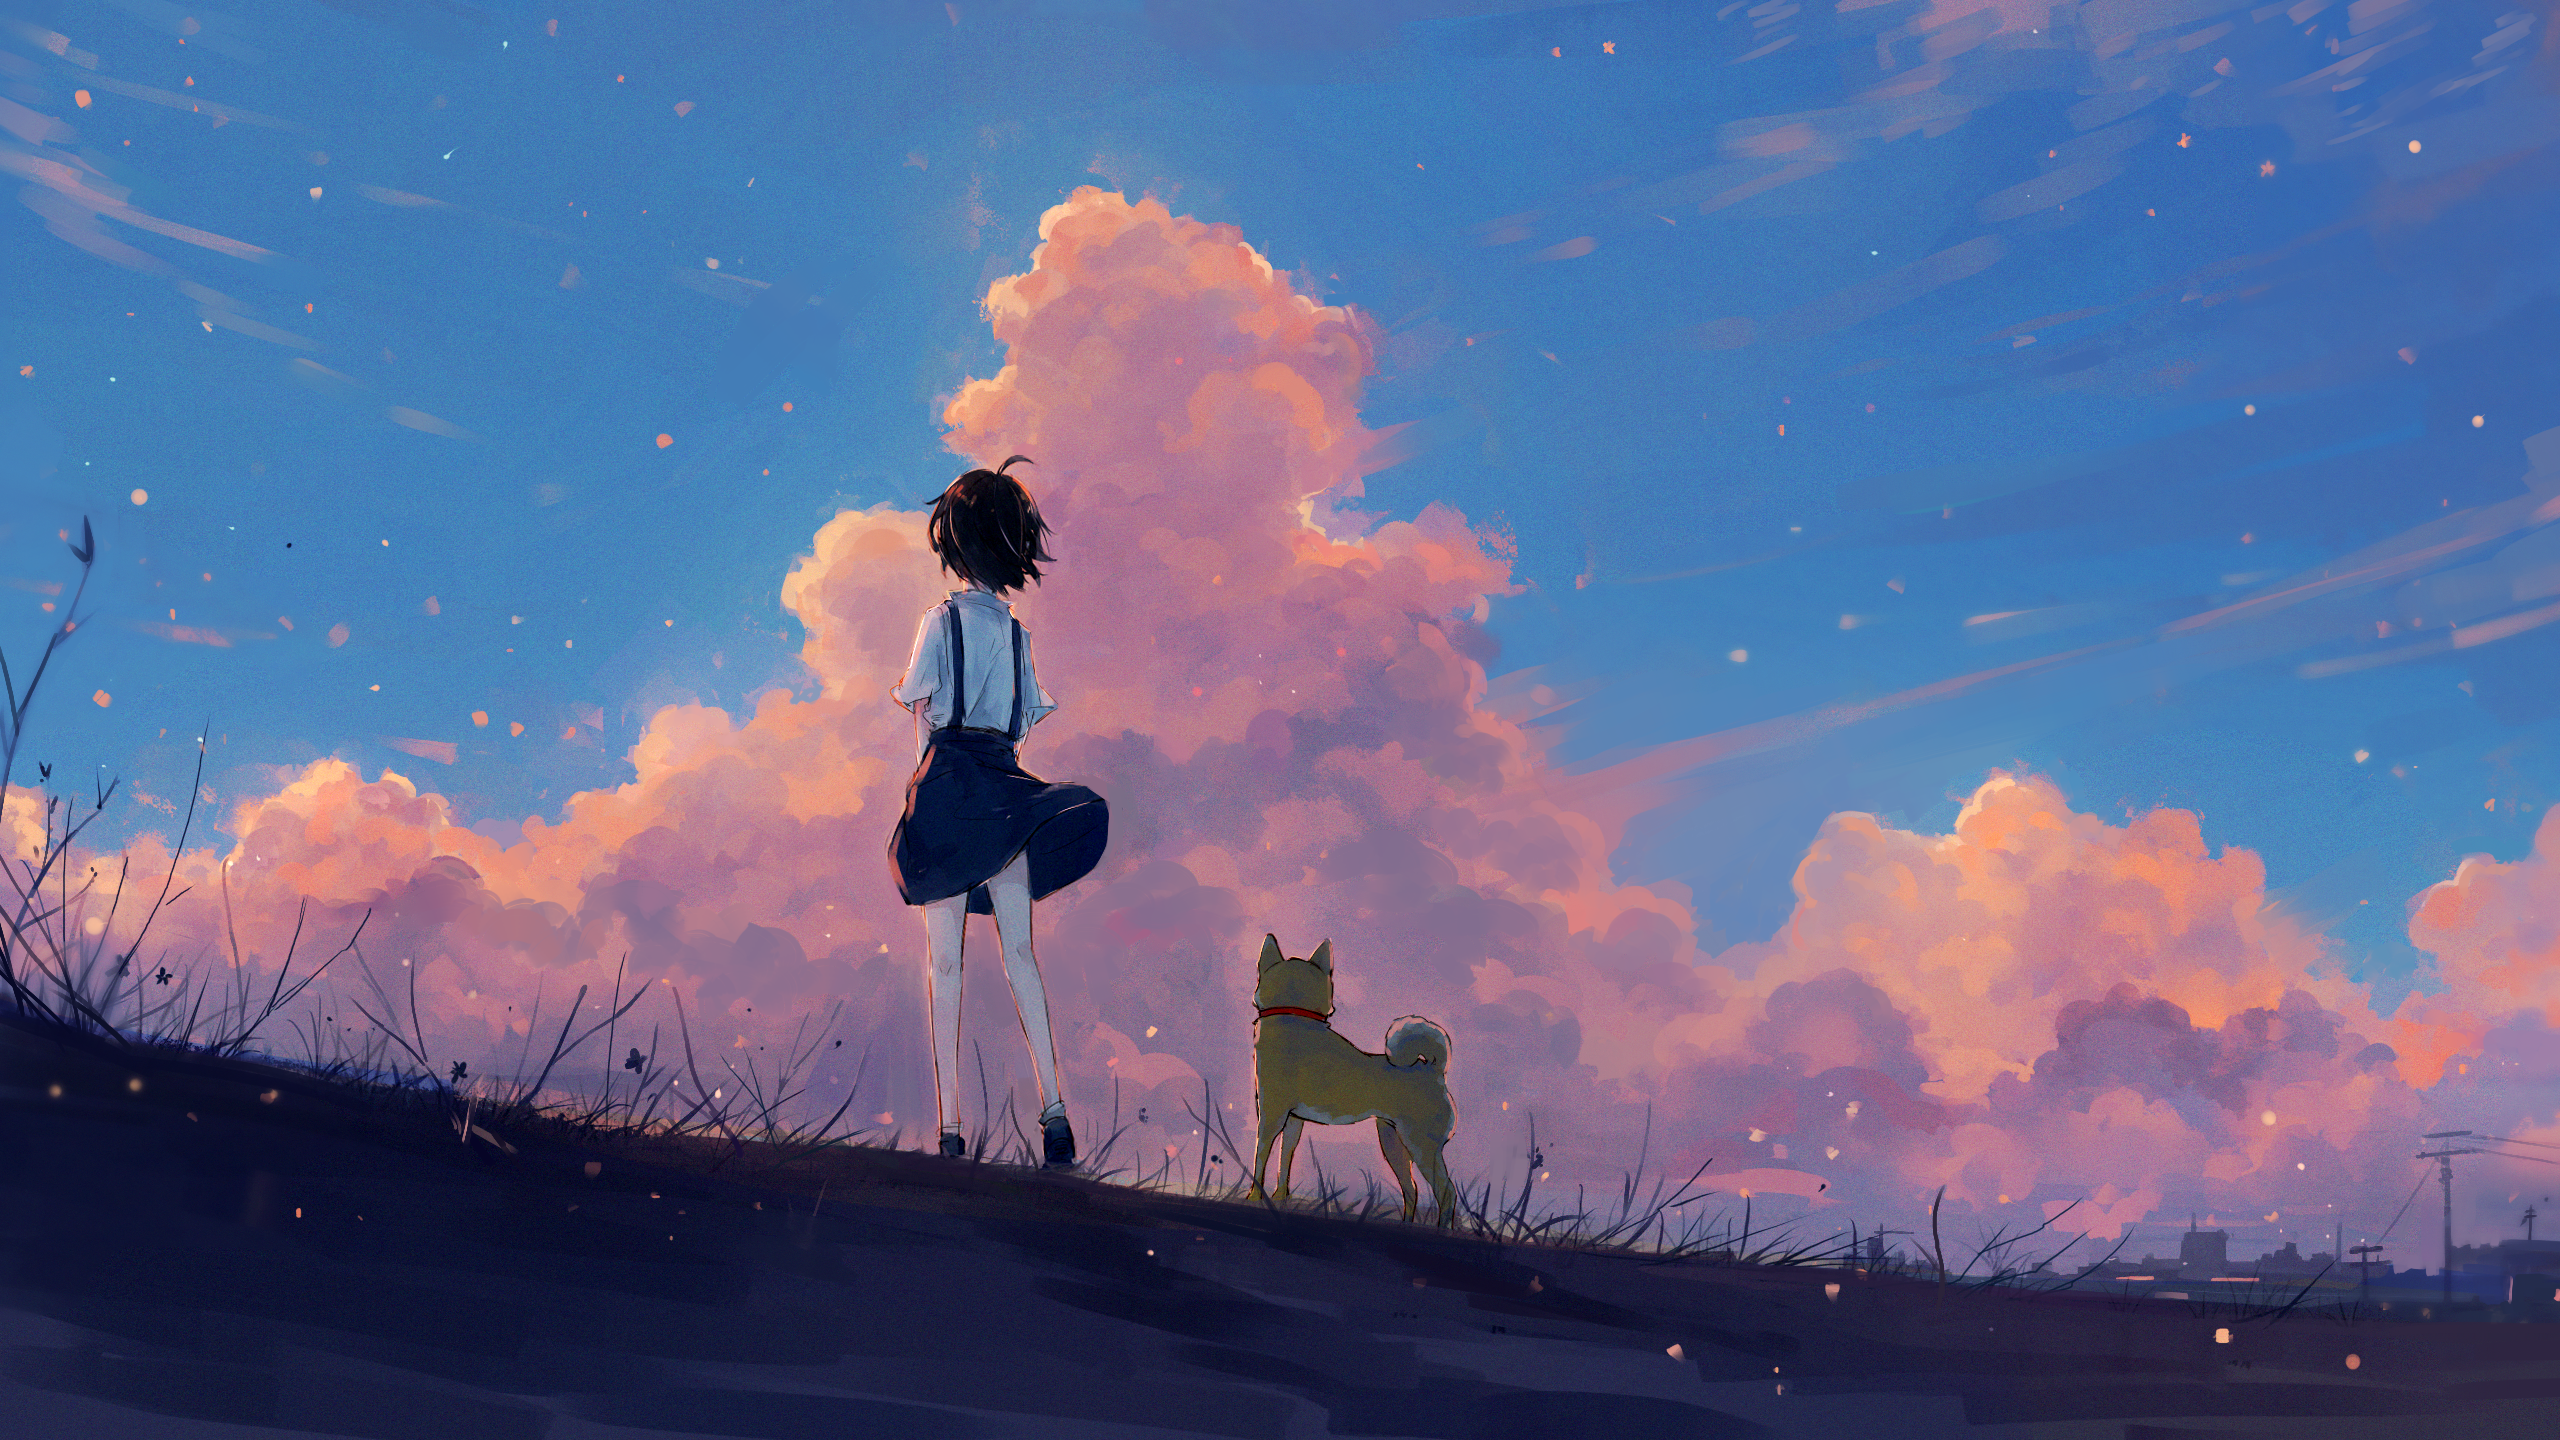 End Of The Summer [Axle] (cdn.awwni.me) Submitted By _Eltanin_ To R ImaginarySliceOfLife 1 C. Desktop Wallpaper Art, Anime Scenery Wallpaper, Landscape Wallpaper